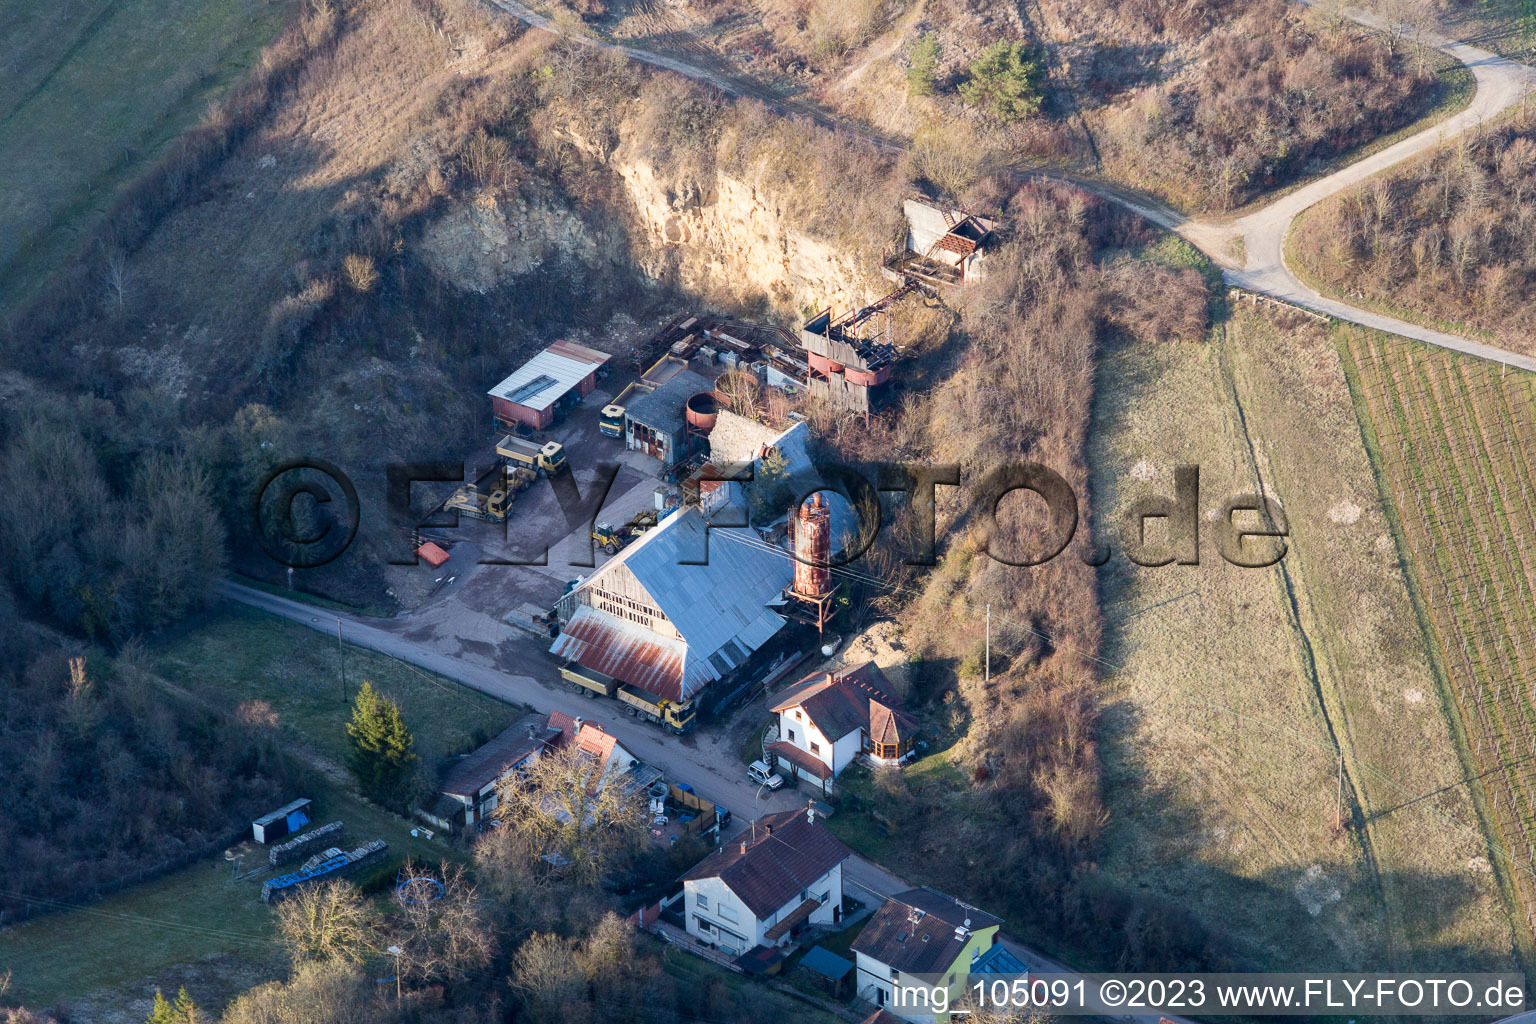 District Gleishorbach in Gleiszellen-Gleishorbach in the state Rhineland-Palatinate, Germany viewn from the air